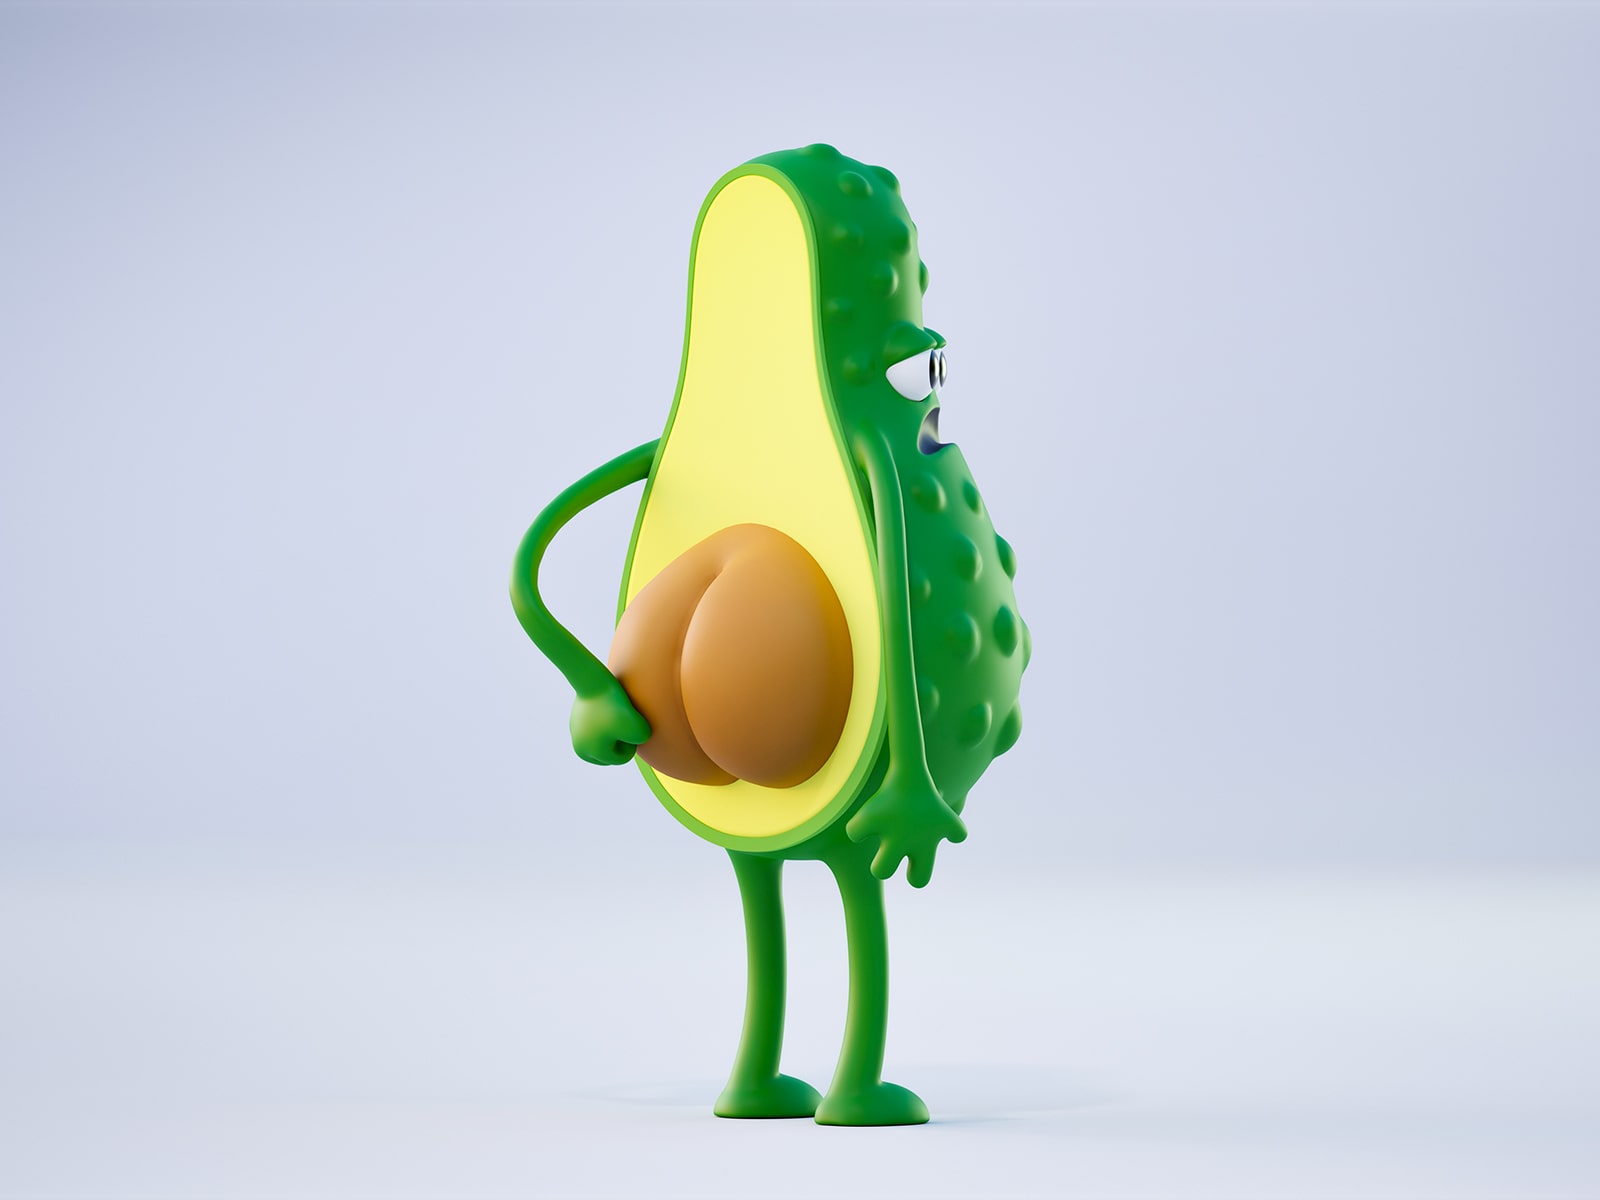 Mr Avocado, the funny NFT collection of vegetables